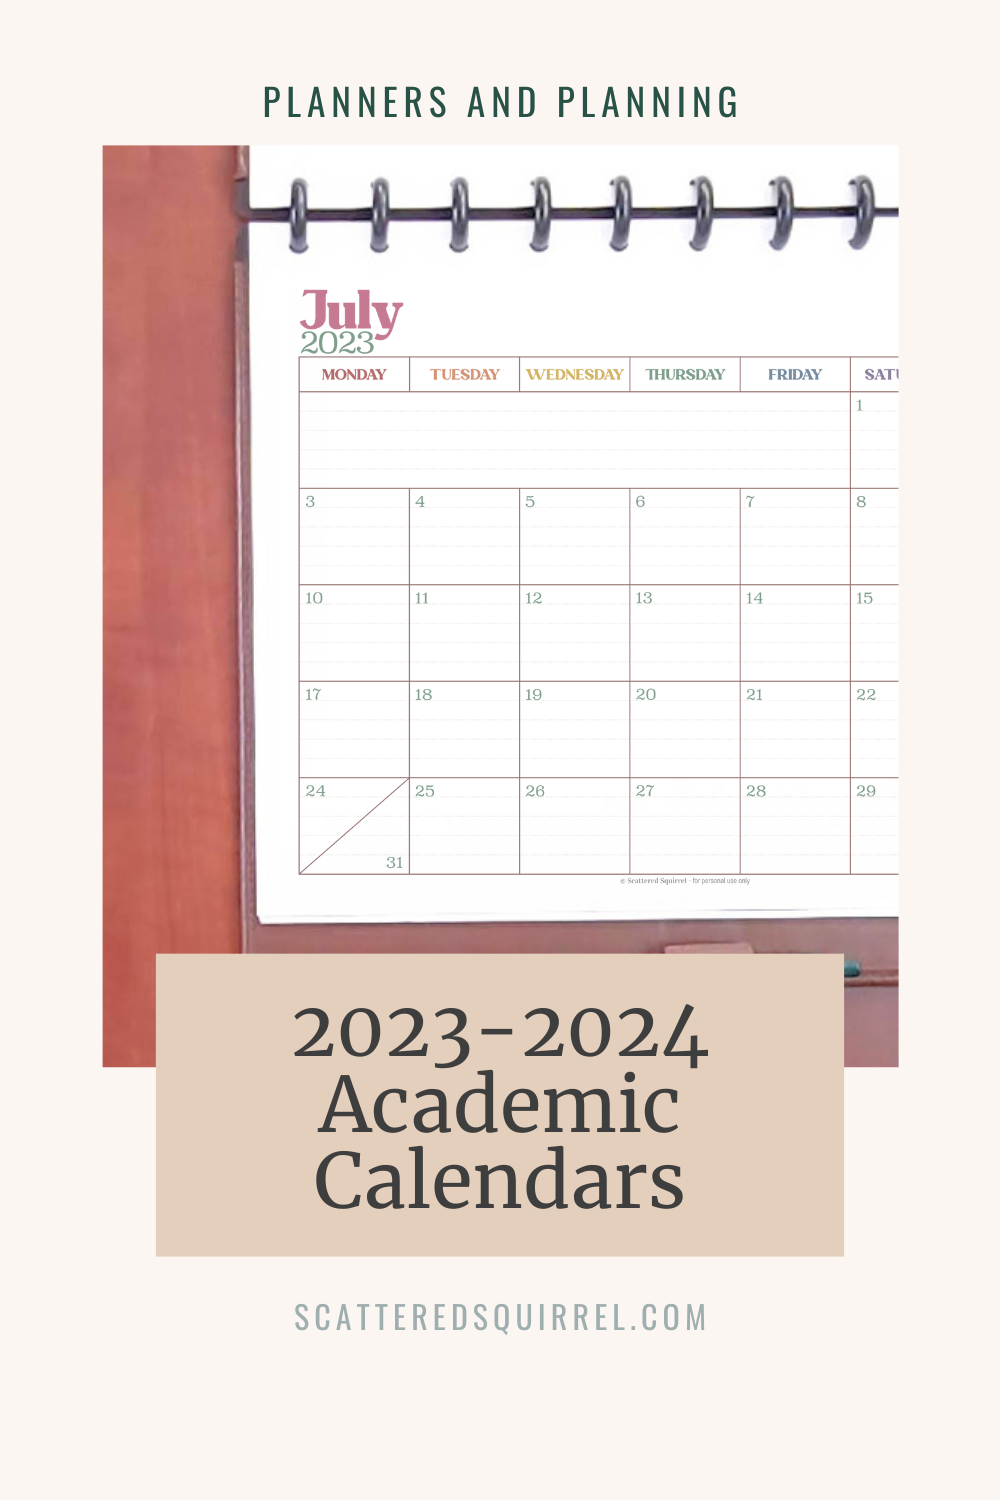 2024 Dated Planner Inserts | Monthly | Monday Start